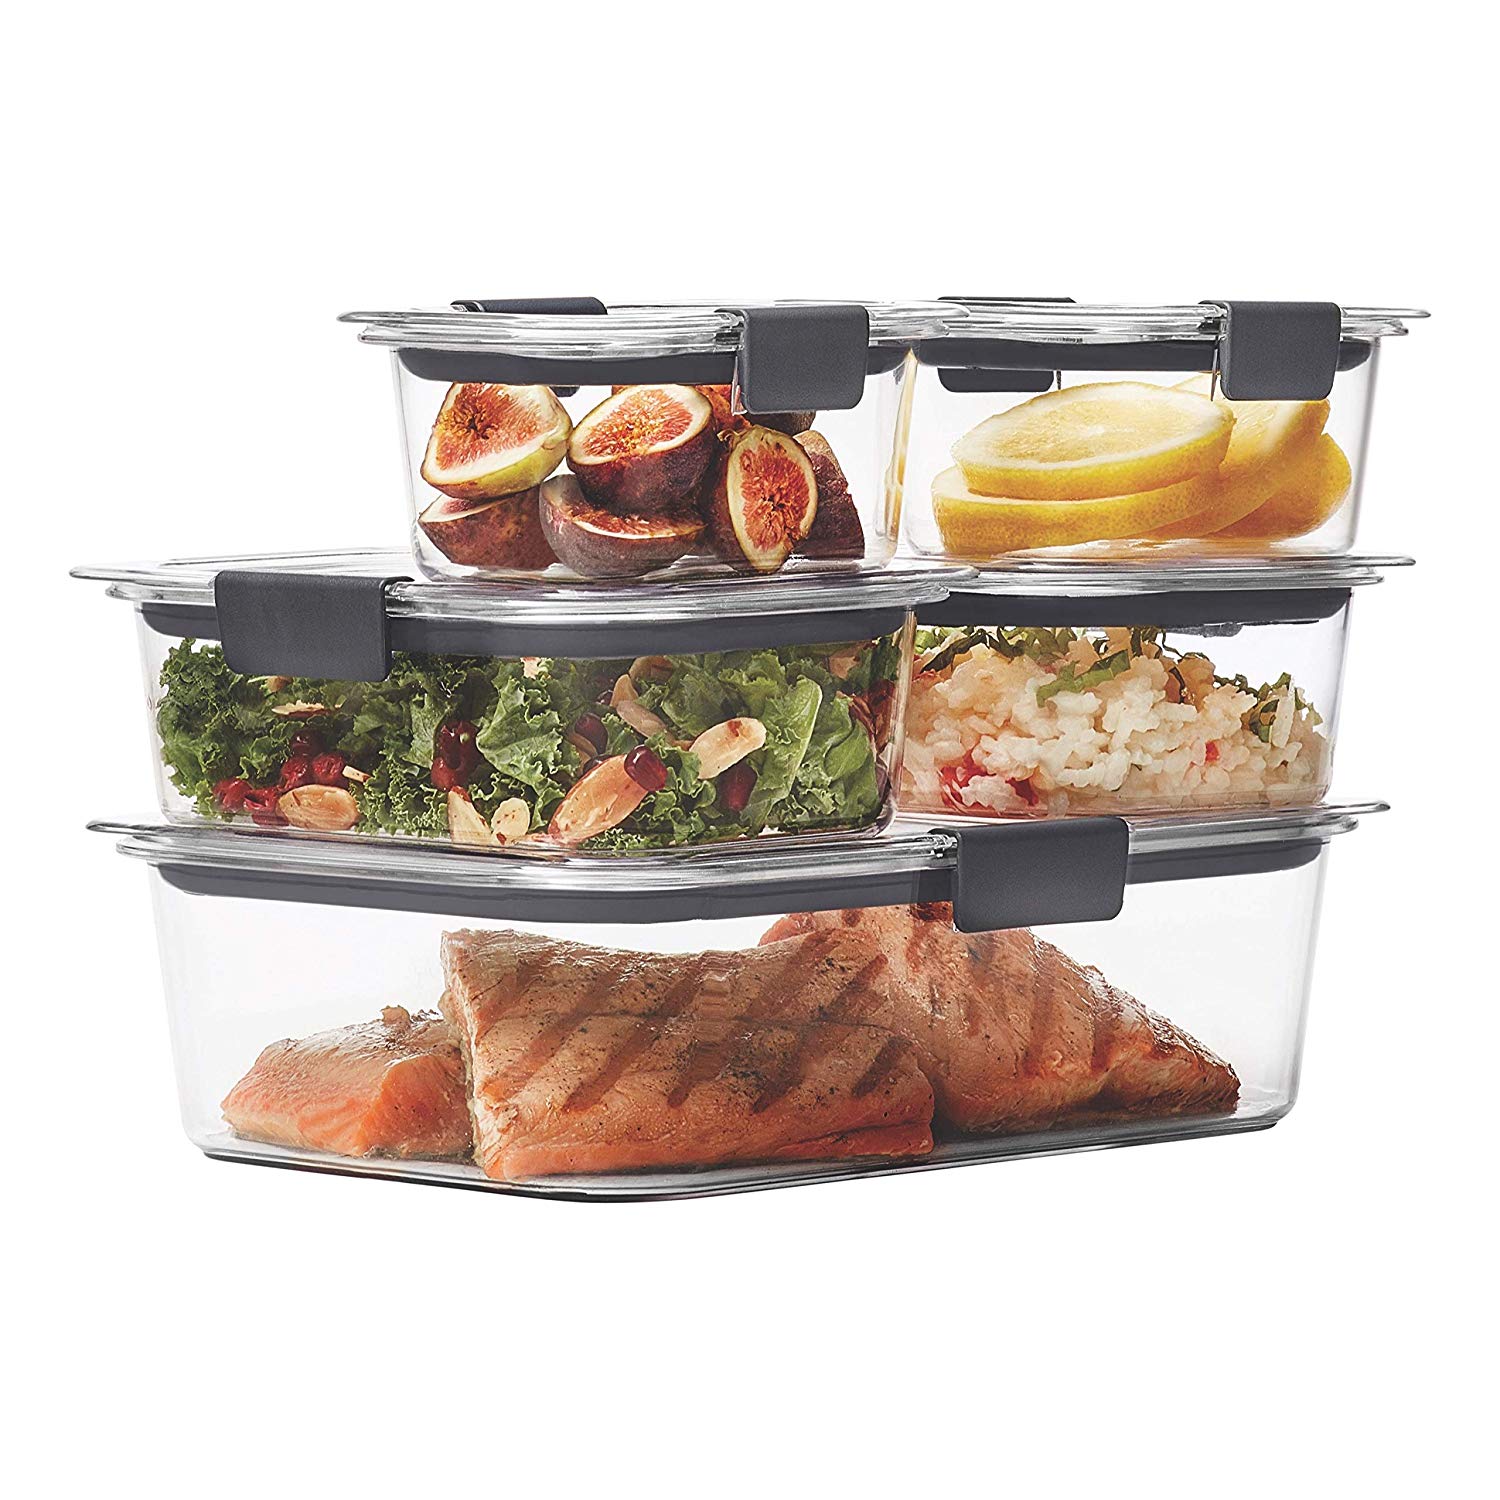 https://www.dontwasteyourmoney.com/wp-content/uploads/2019/10/rubbermaid-leak-proof-food-storage-containers-storage-for-leftovers.jpg